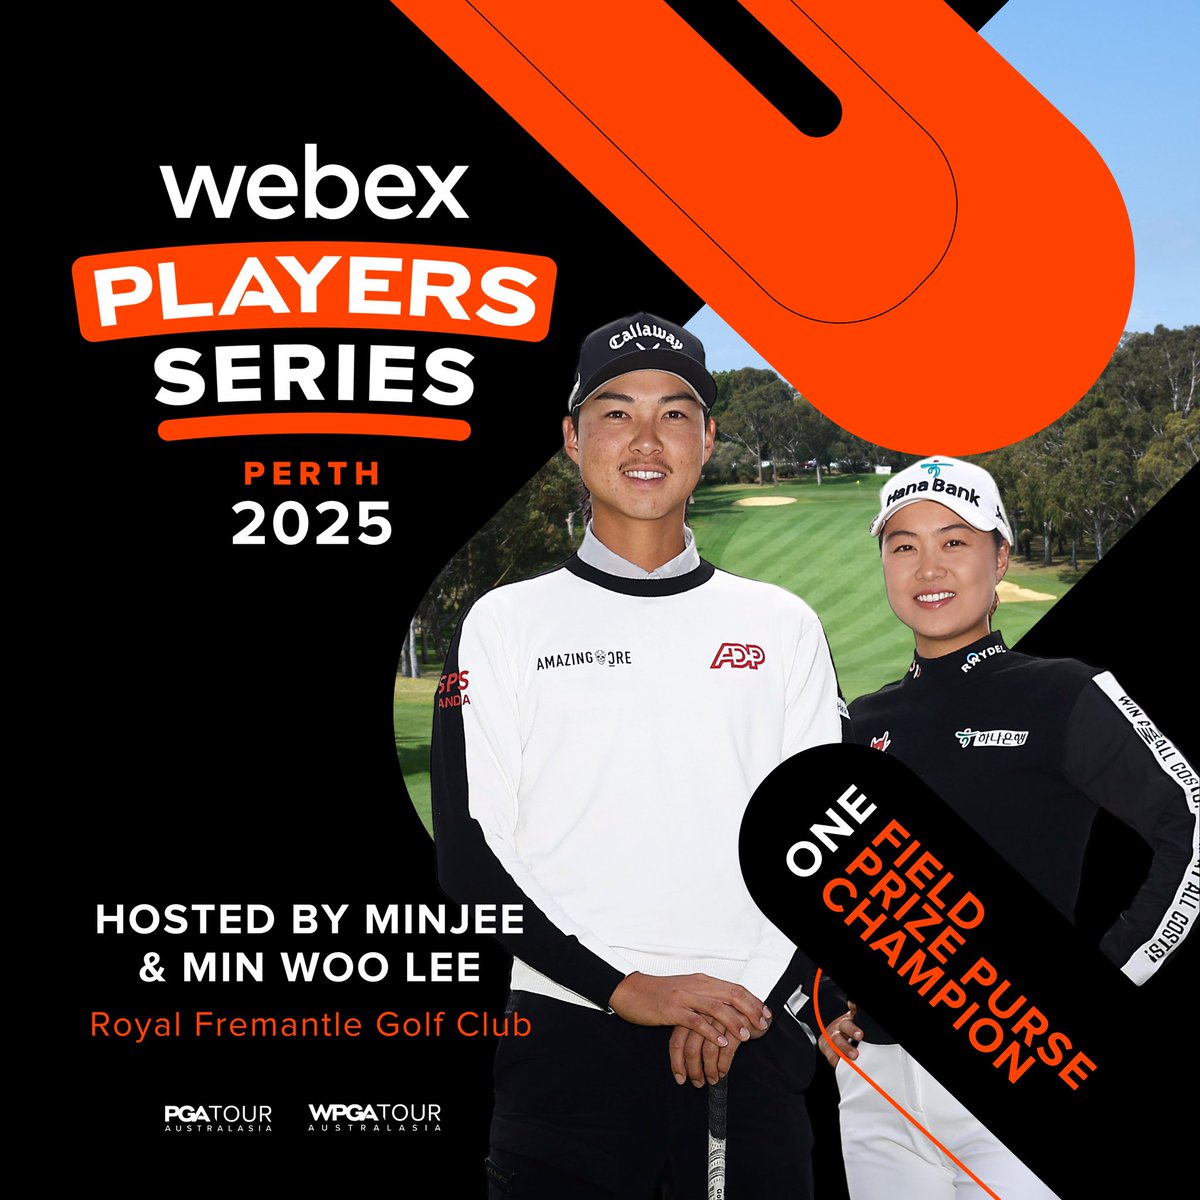 Locked in for three years 🤝 The @Webex Players Series is expanding to Perth with a new event hosted by @minjeegolf and @Minwoo27Lee on both the Challenger PGA Tour of Australasia and @WPGATour. From 2024/25, we'll have six events where women and men will compete against